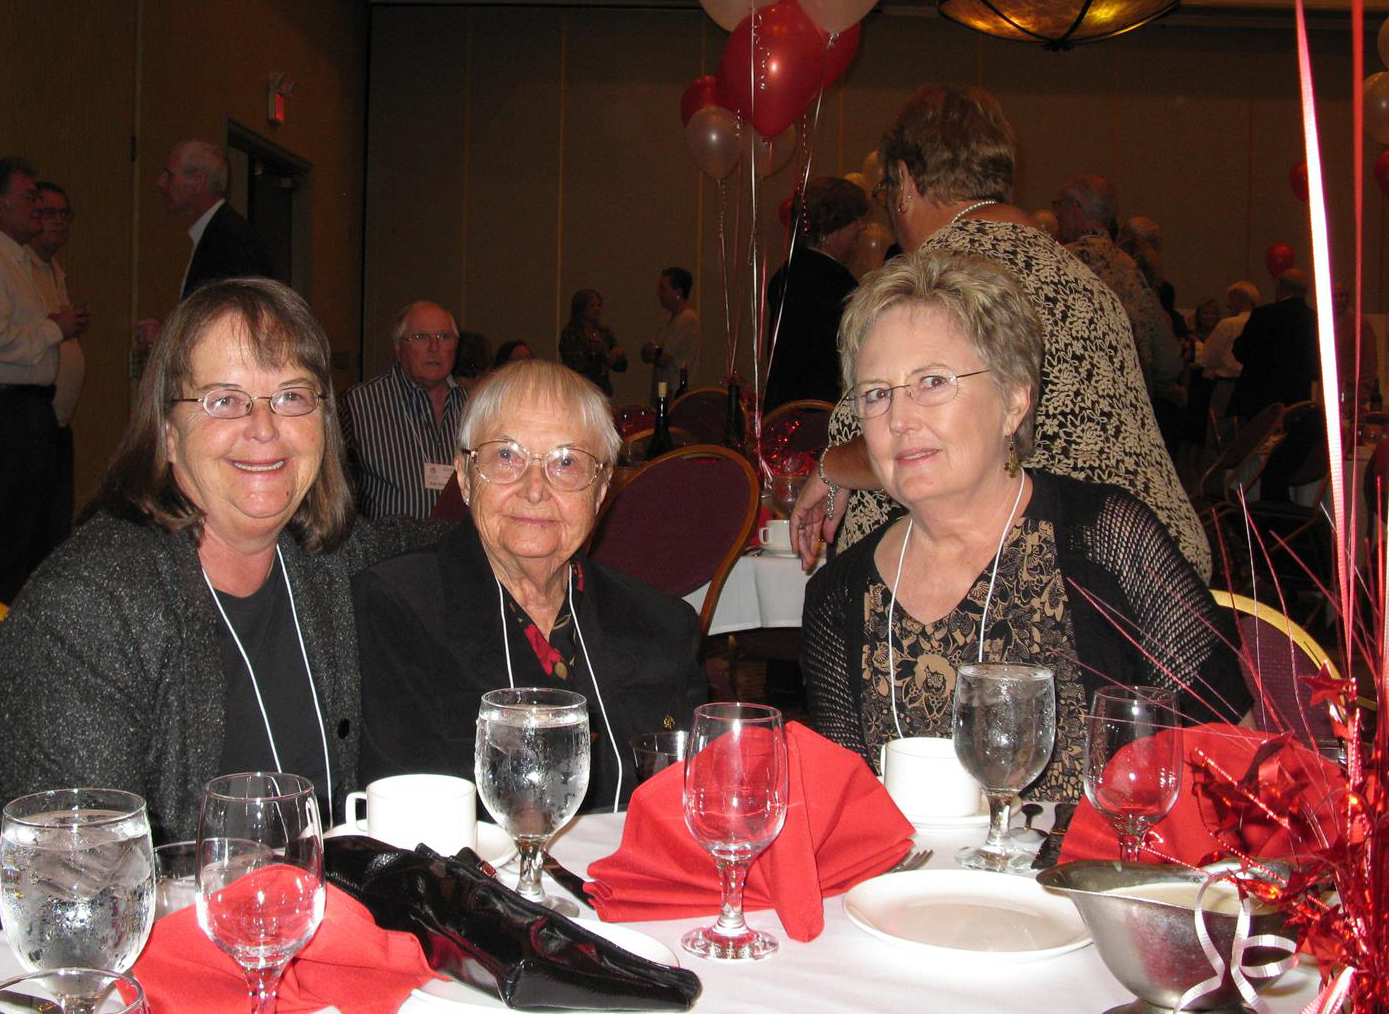 Susan Smith, her mom and Lynne Crosby Littlefield.